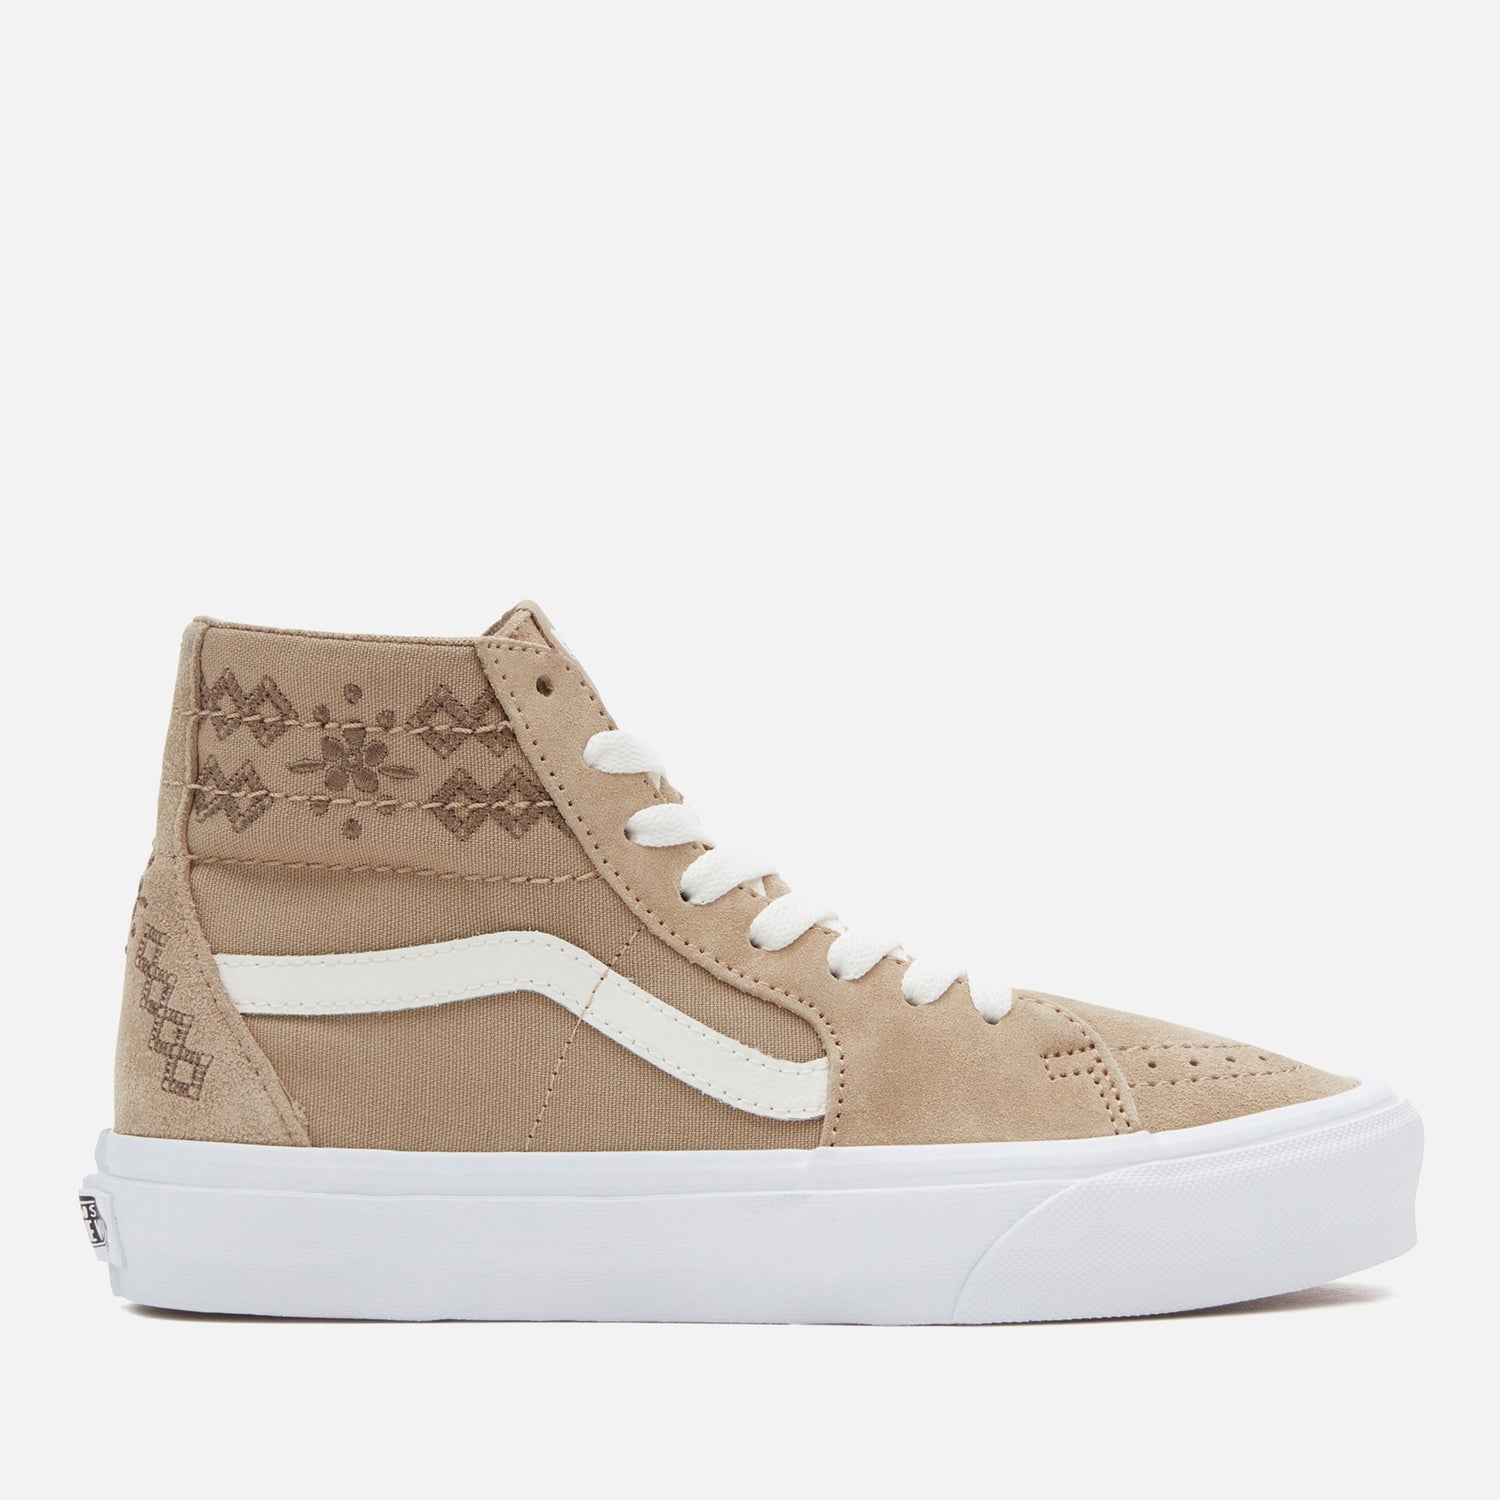 Vans Women's SK8-Hi Tapered Canvas and Suede Trainers - UK 7